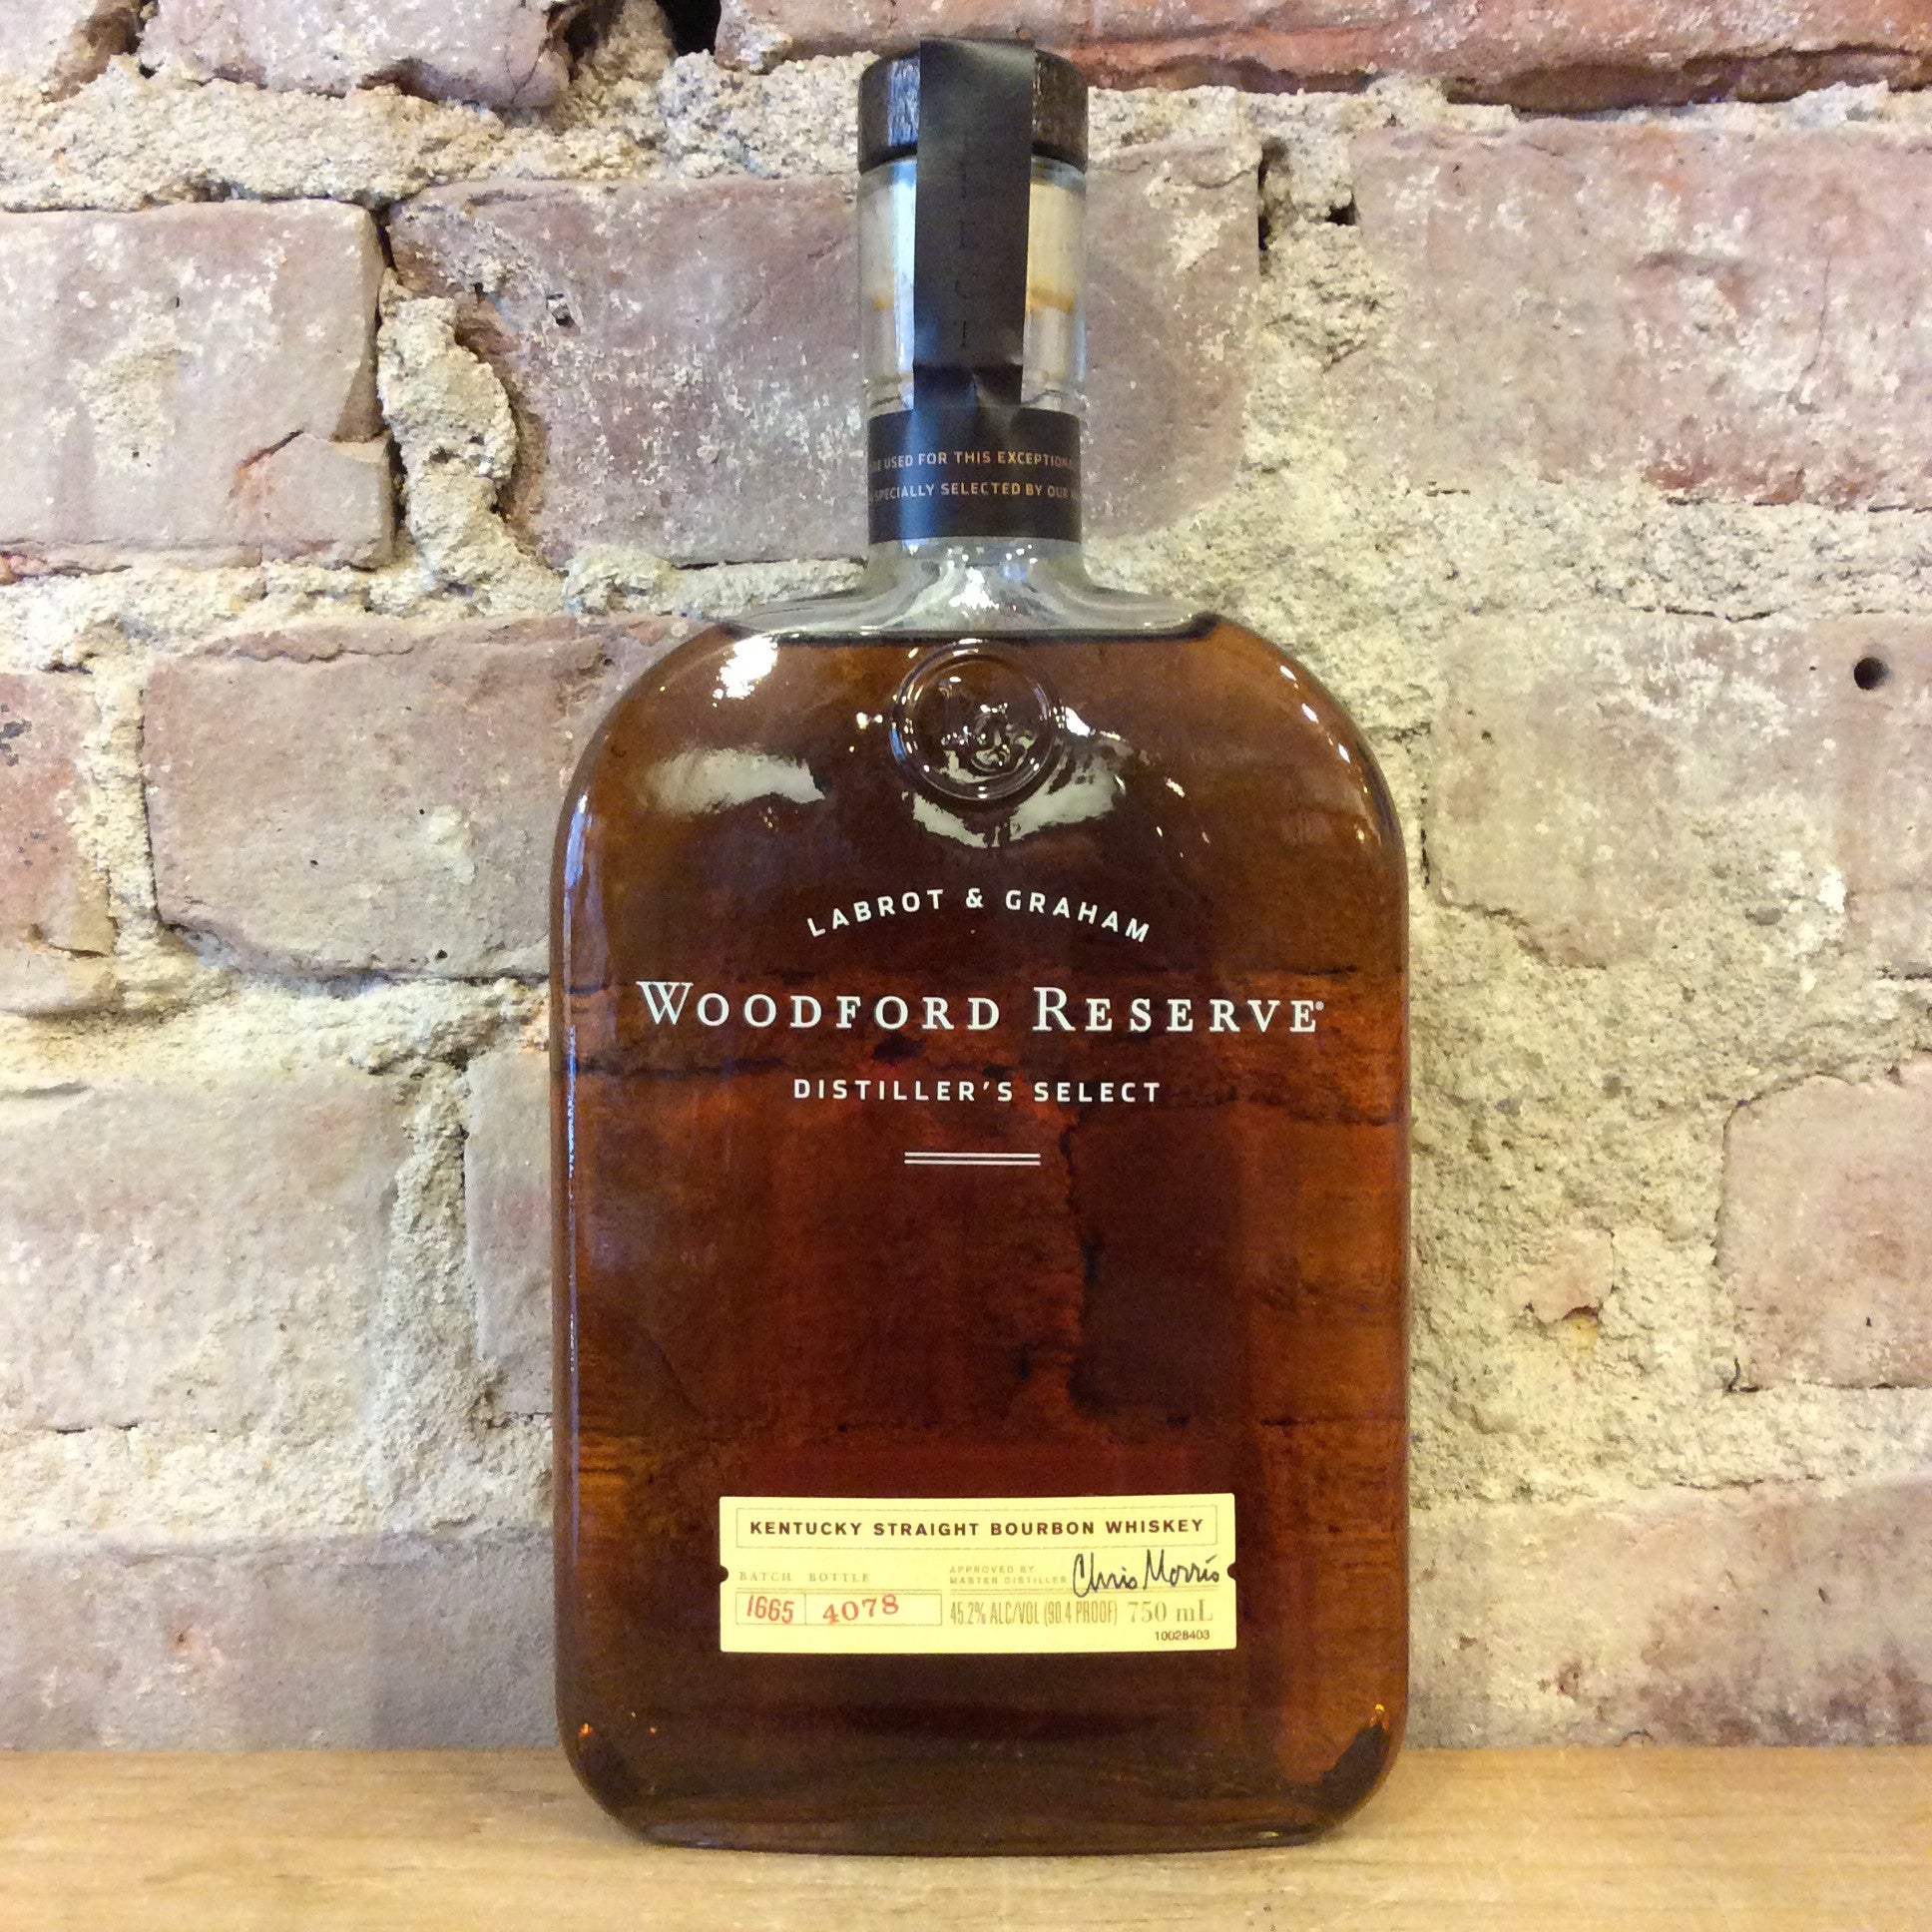 Woodford Reserve Distillers Select Kentucky Straight Bourbon Whiskey 750mL